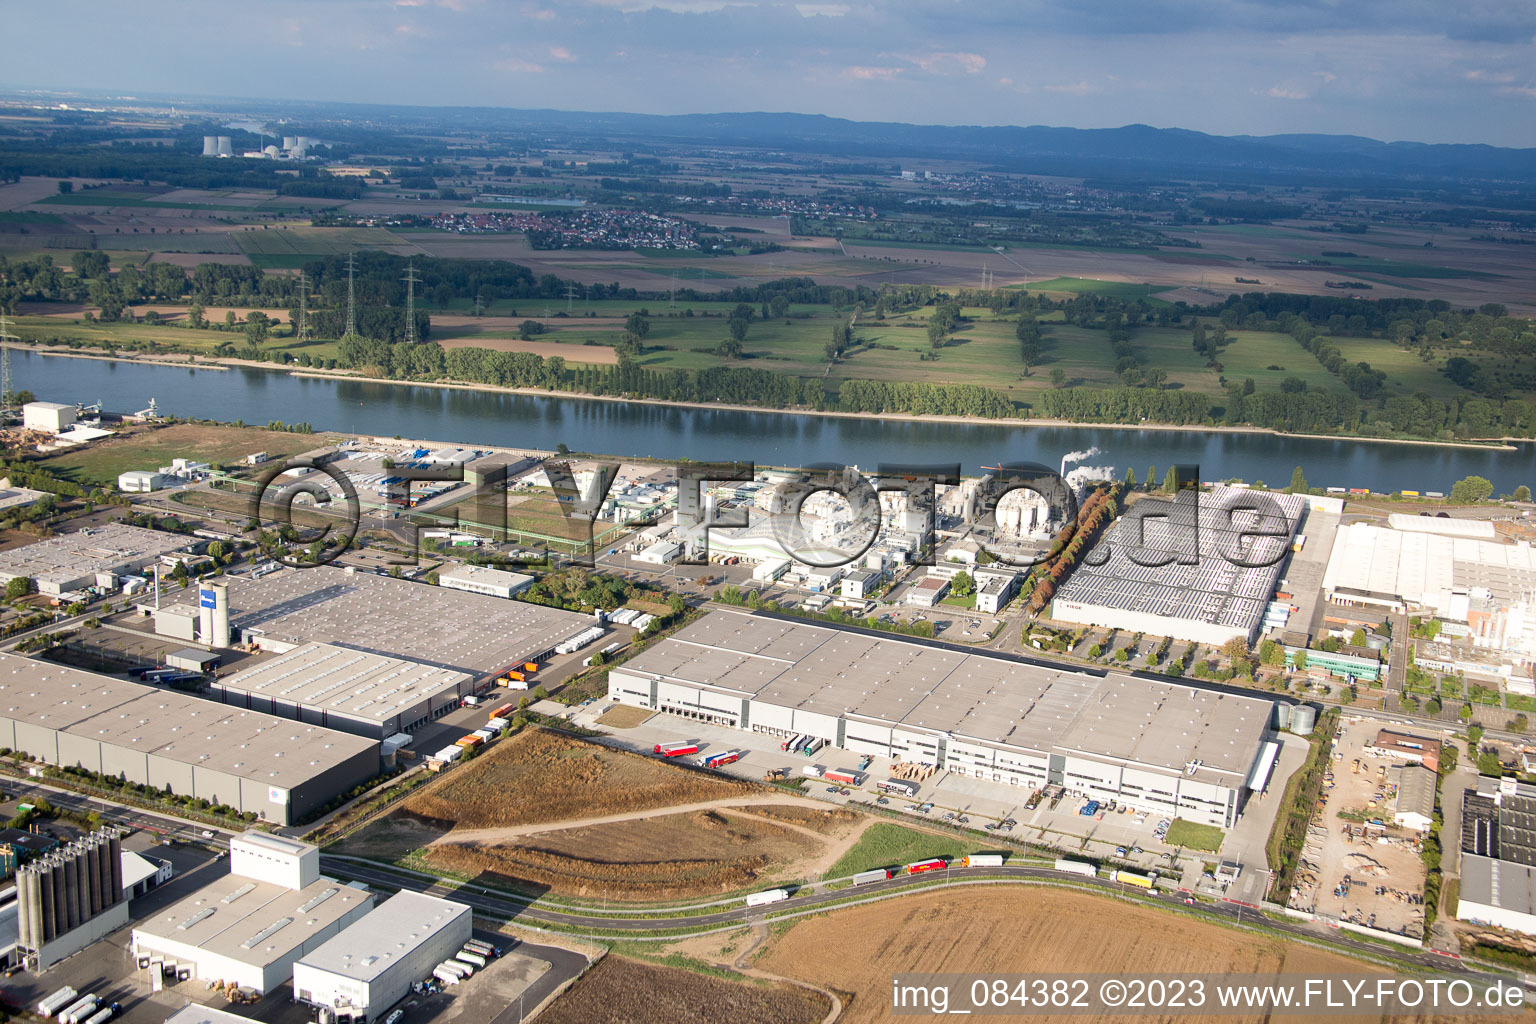 Aerial view of North industrial area on the Rhine in Worms in the state Rhineland-Palatinate, Germany